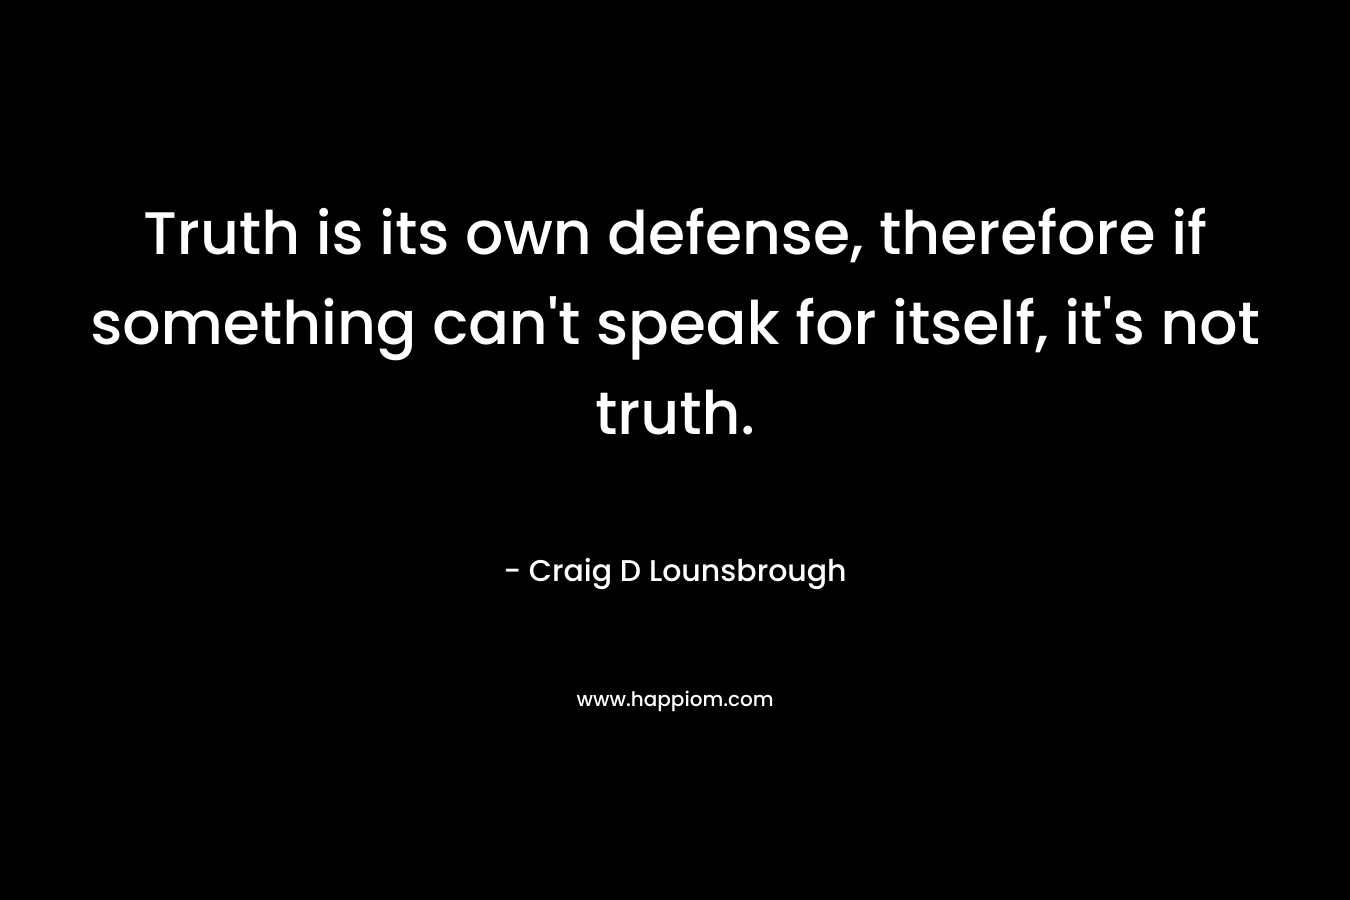 Truth is its own defense, therefore if something can't speak for itself, it's not truth.